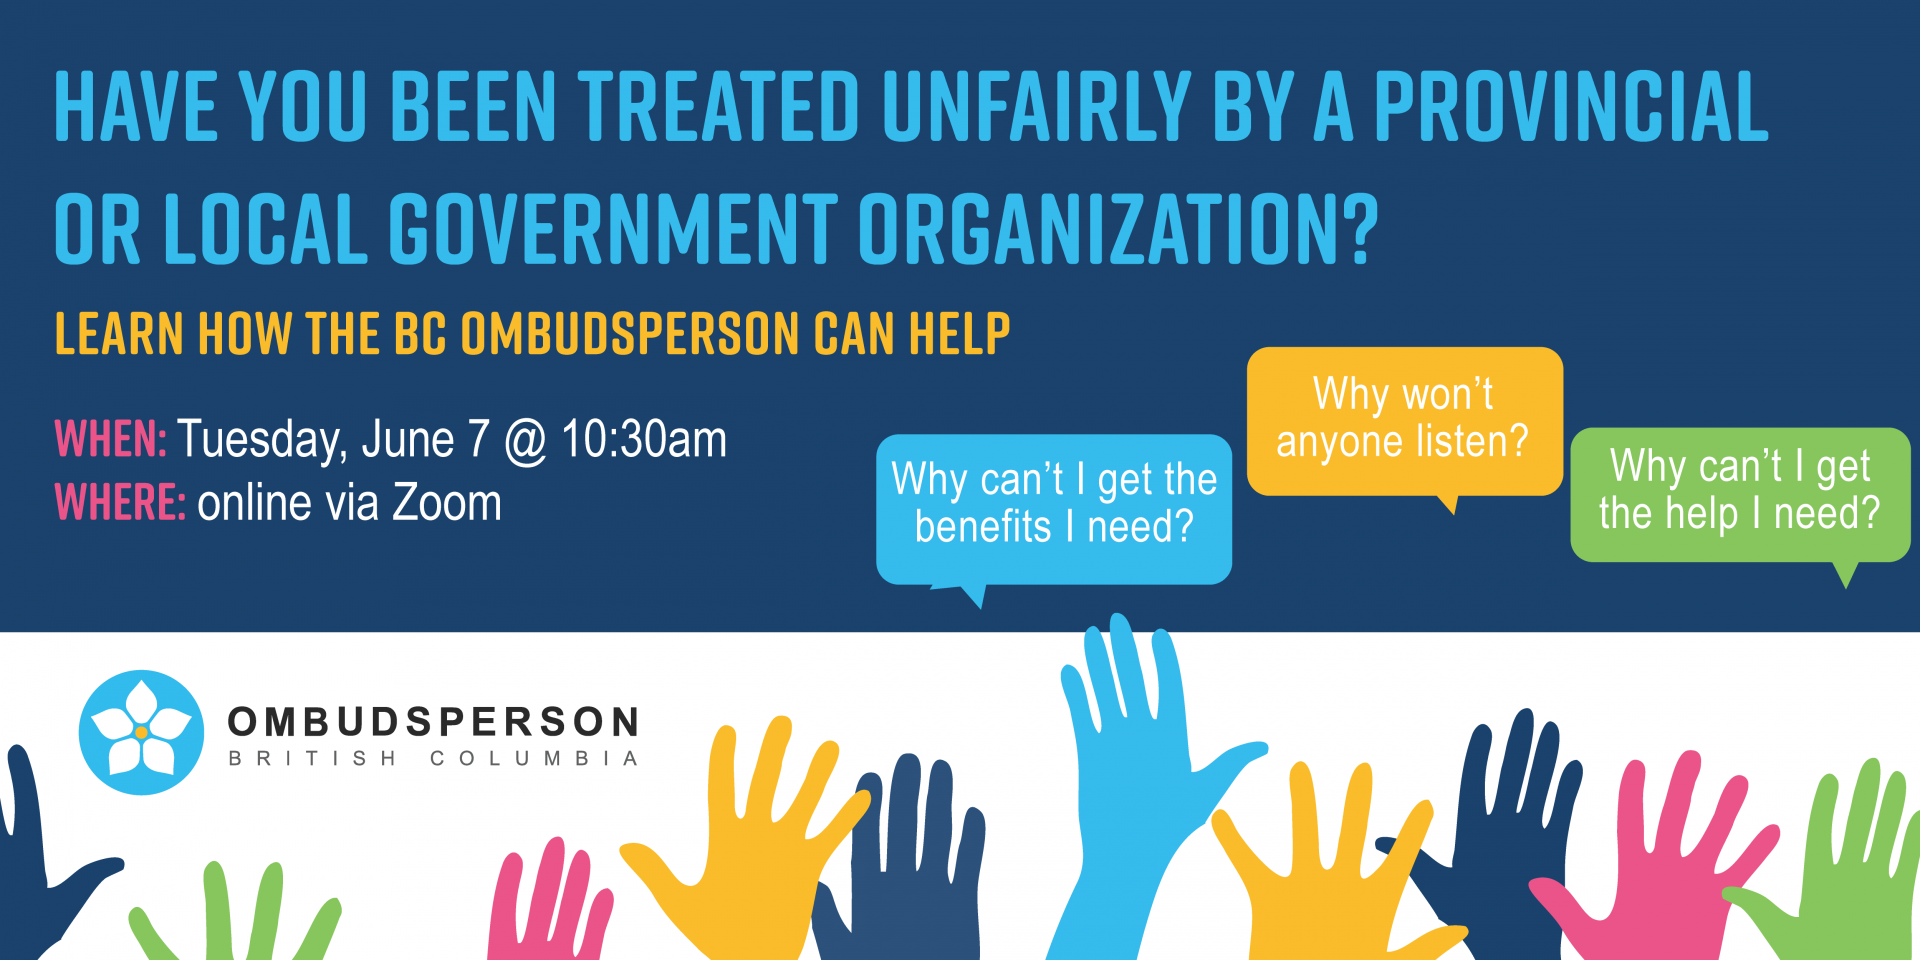 Join BC Ombudsperson staff to learn how we can help!